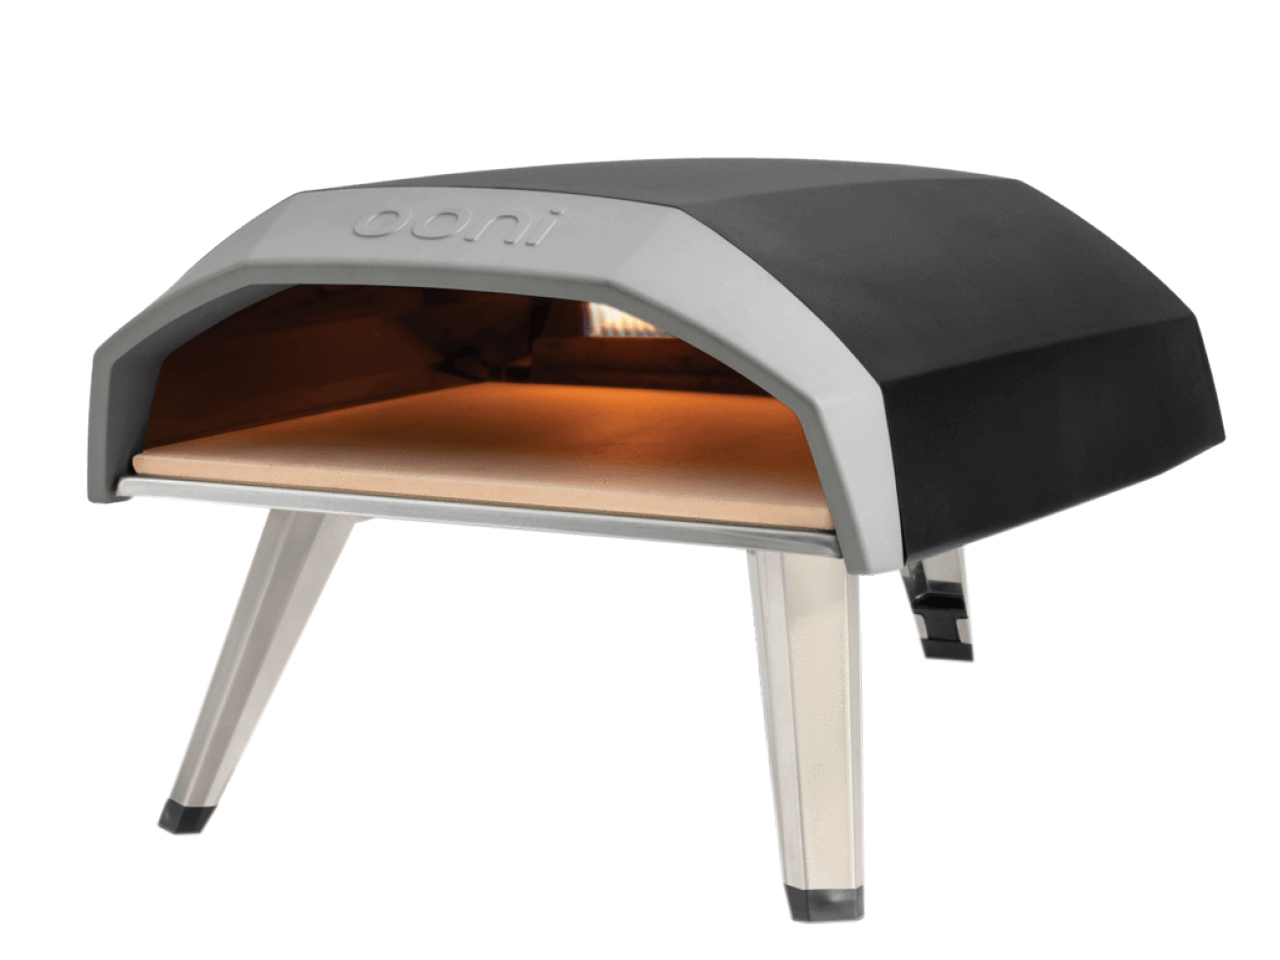 The Ooni Koda gas-powered pizza oven, as part of the Best Black Friday deals.